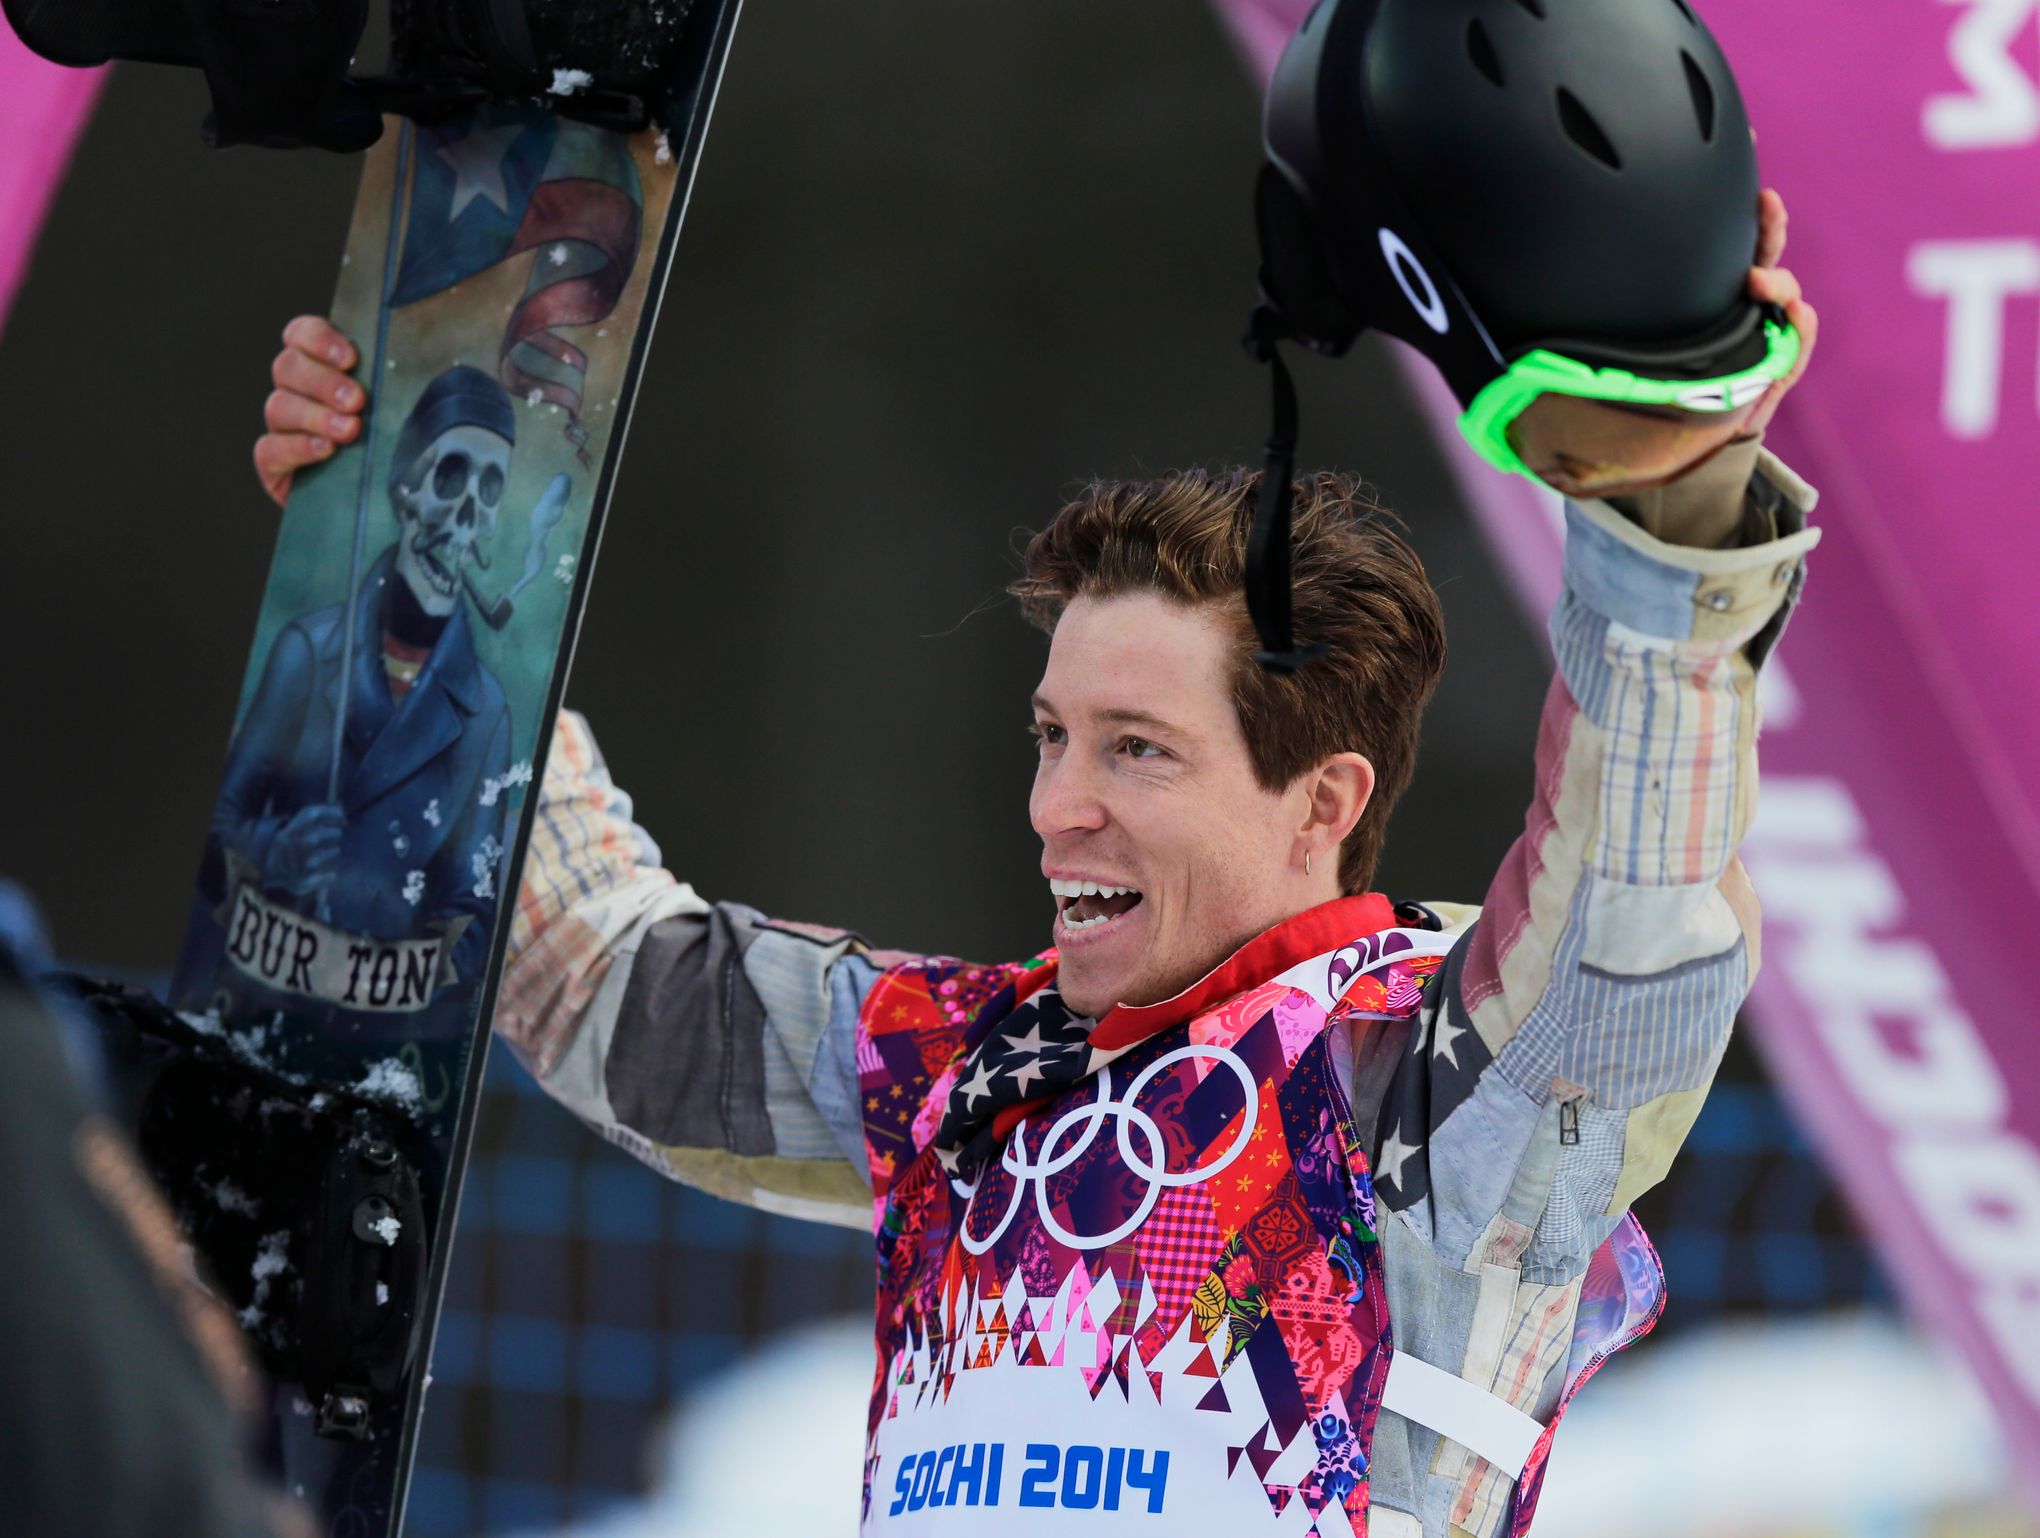 Shaun White, Biography, Snowboarding, Olympic Medals, & Facts